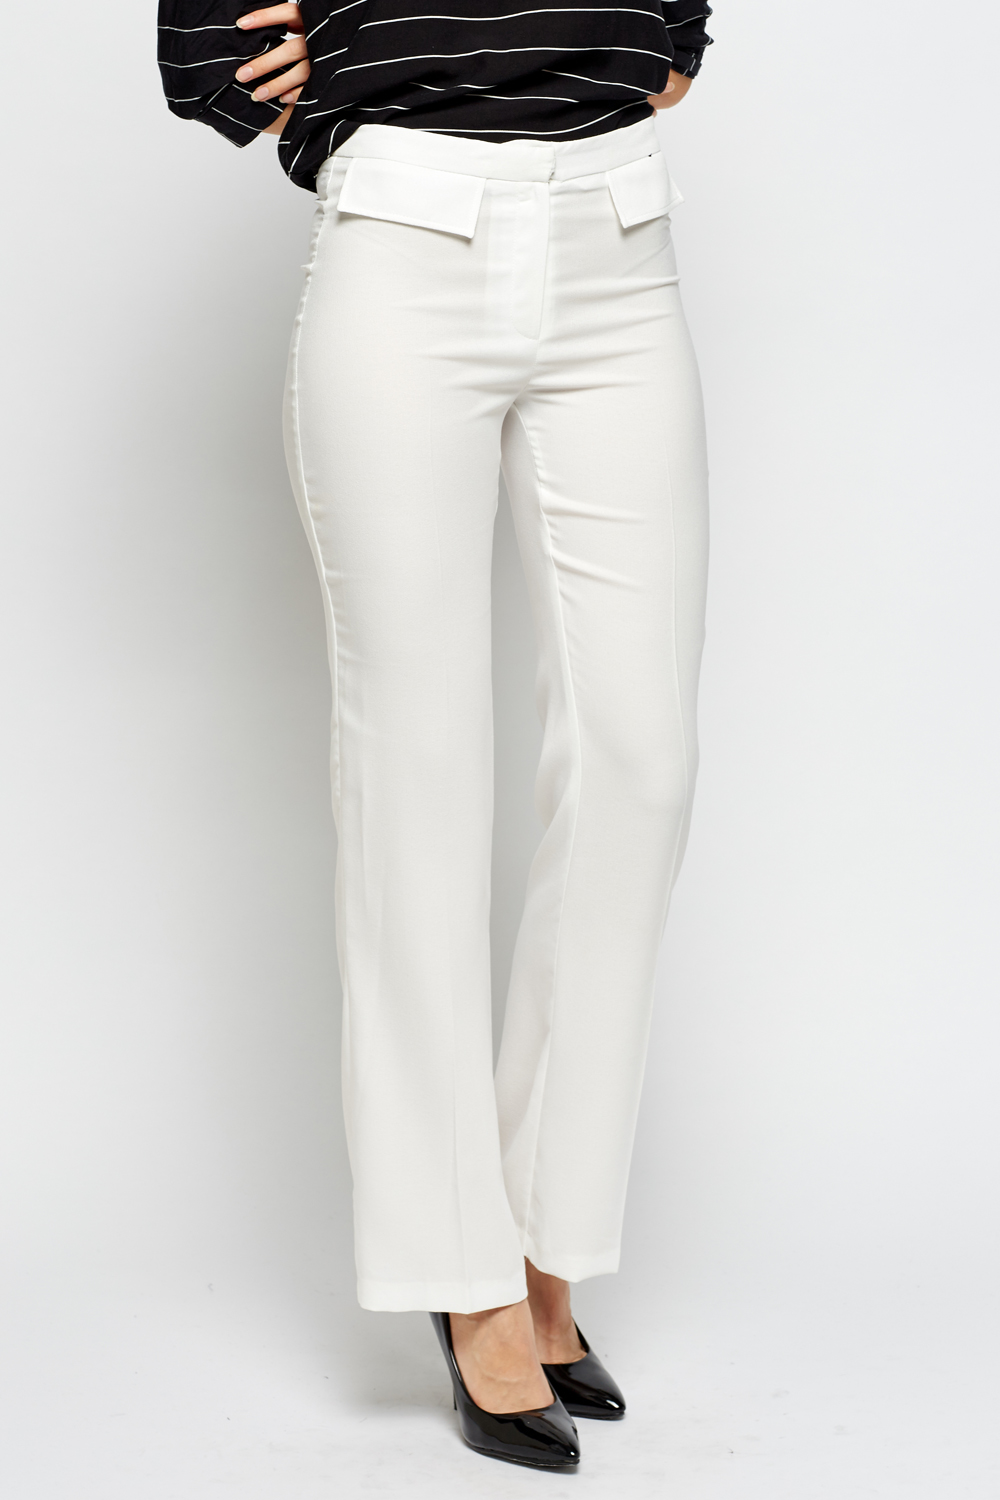 White Straight Leg Trousers - Just $7